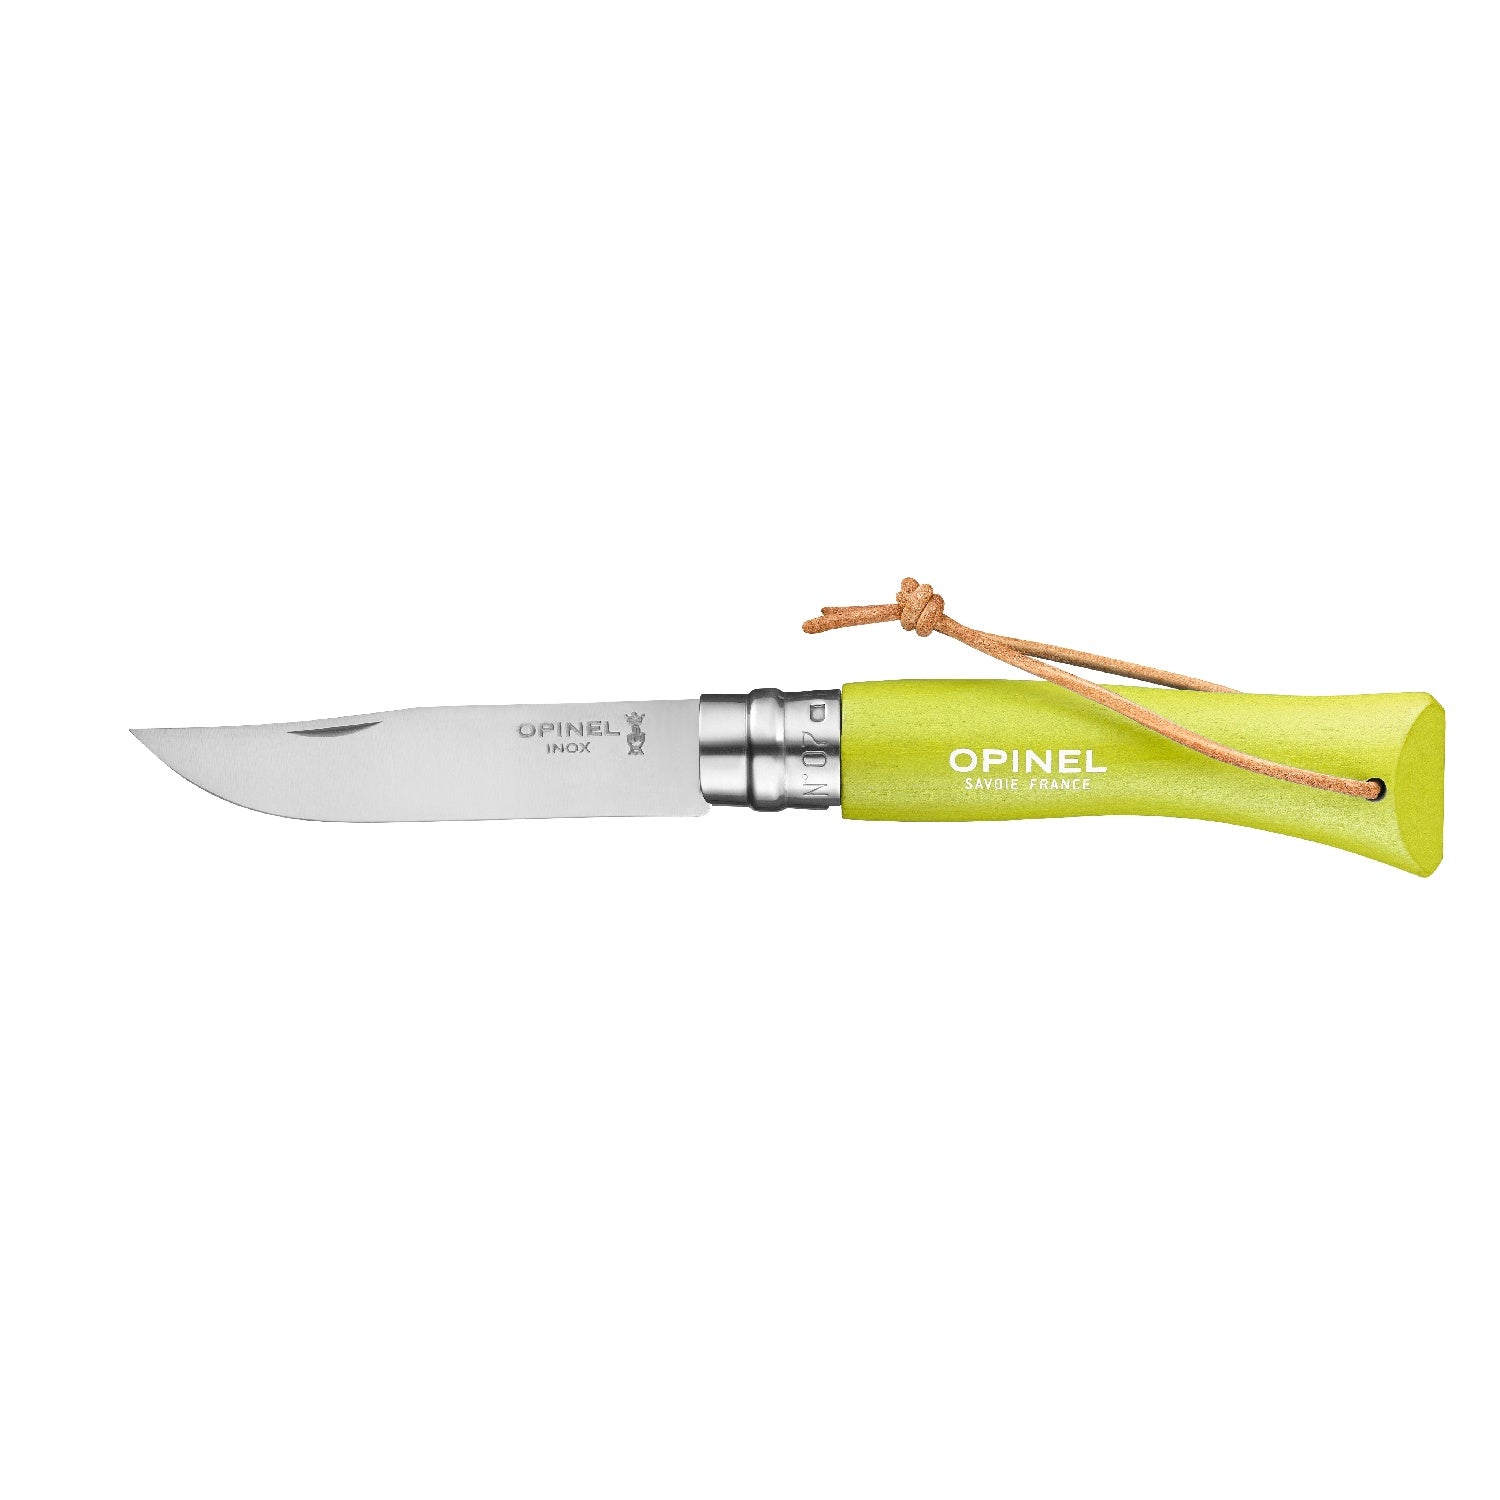 Opinel Colorama Trekking Knife in Anise